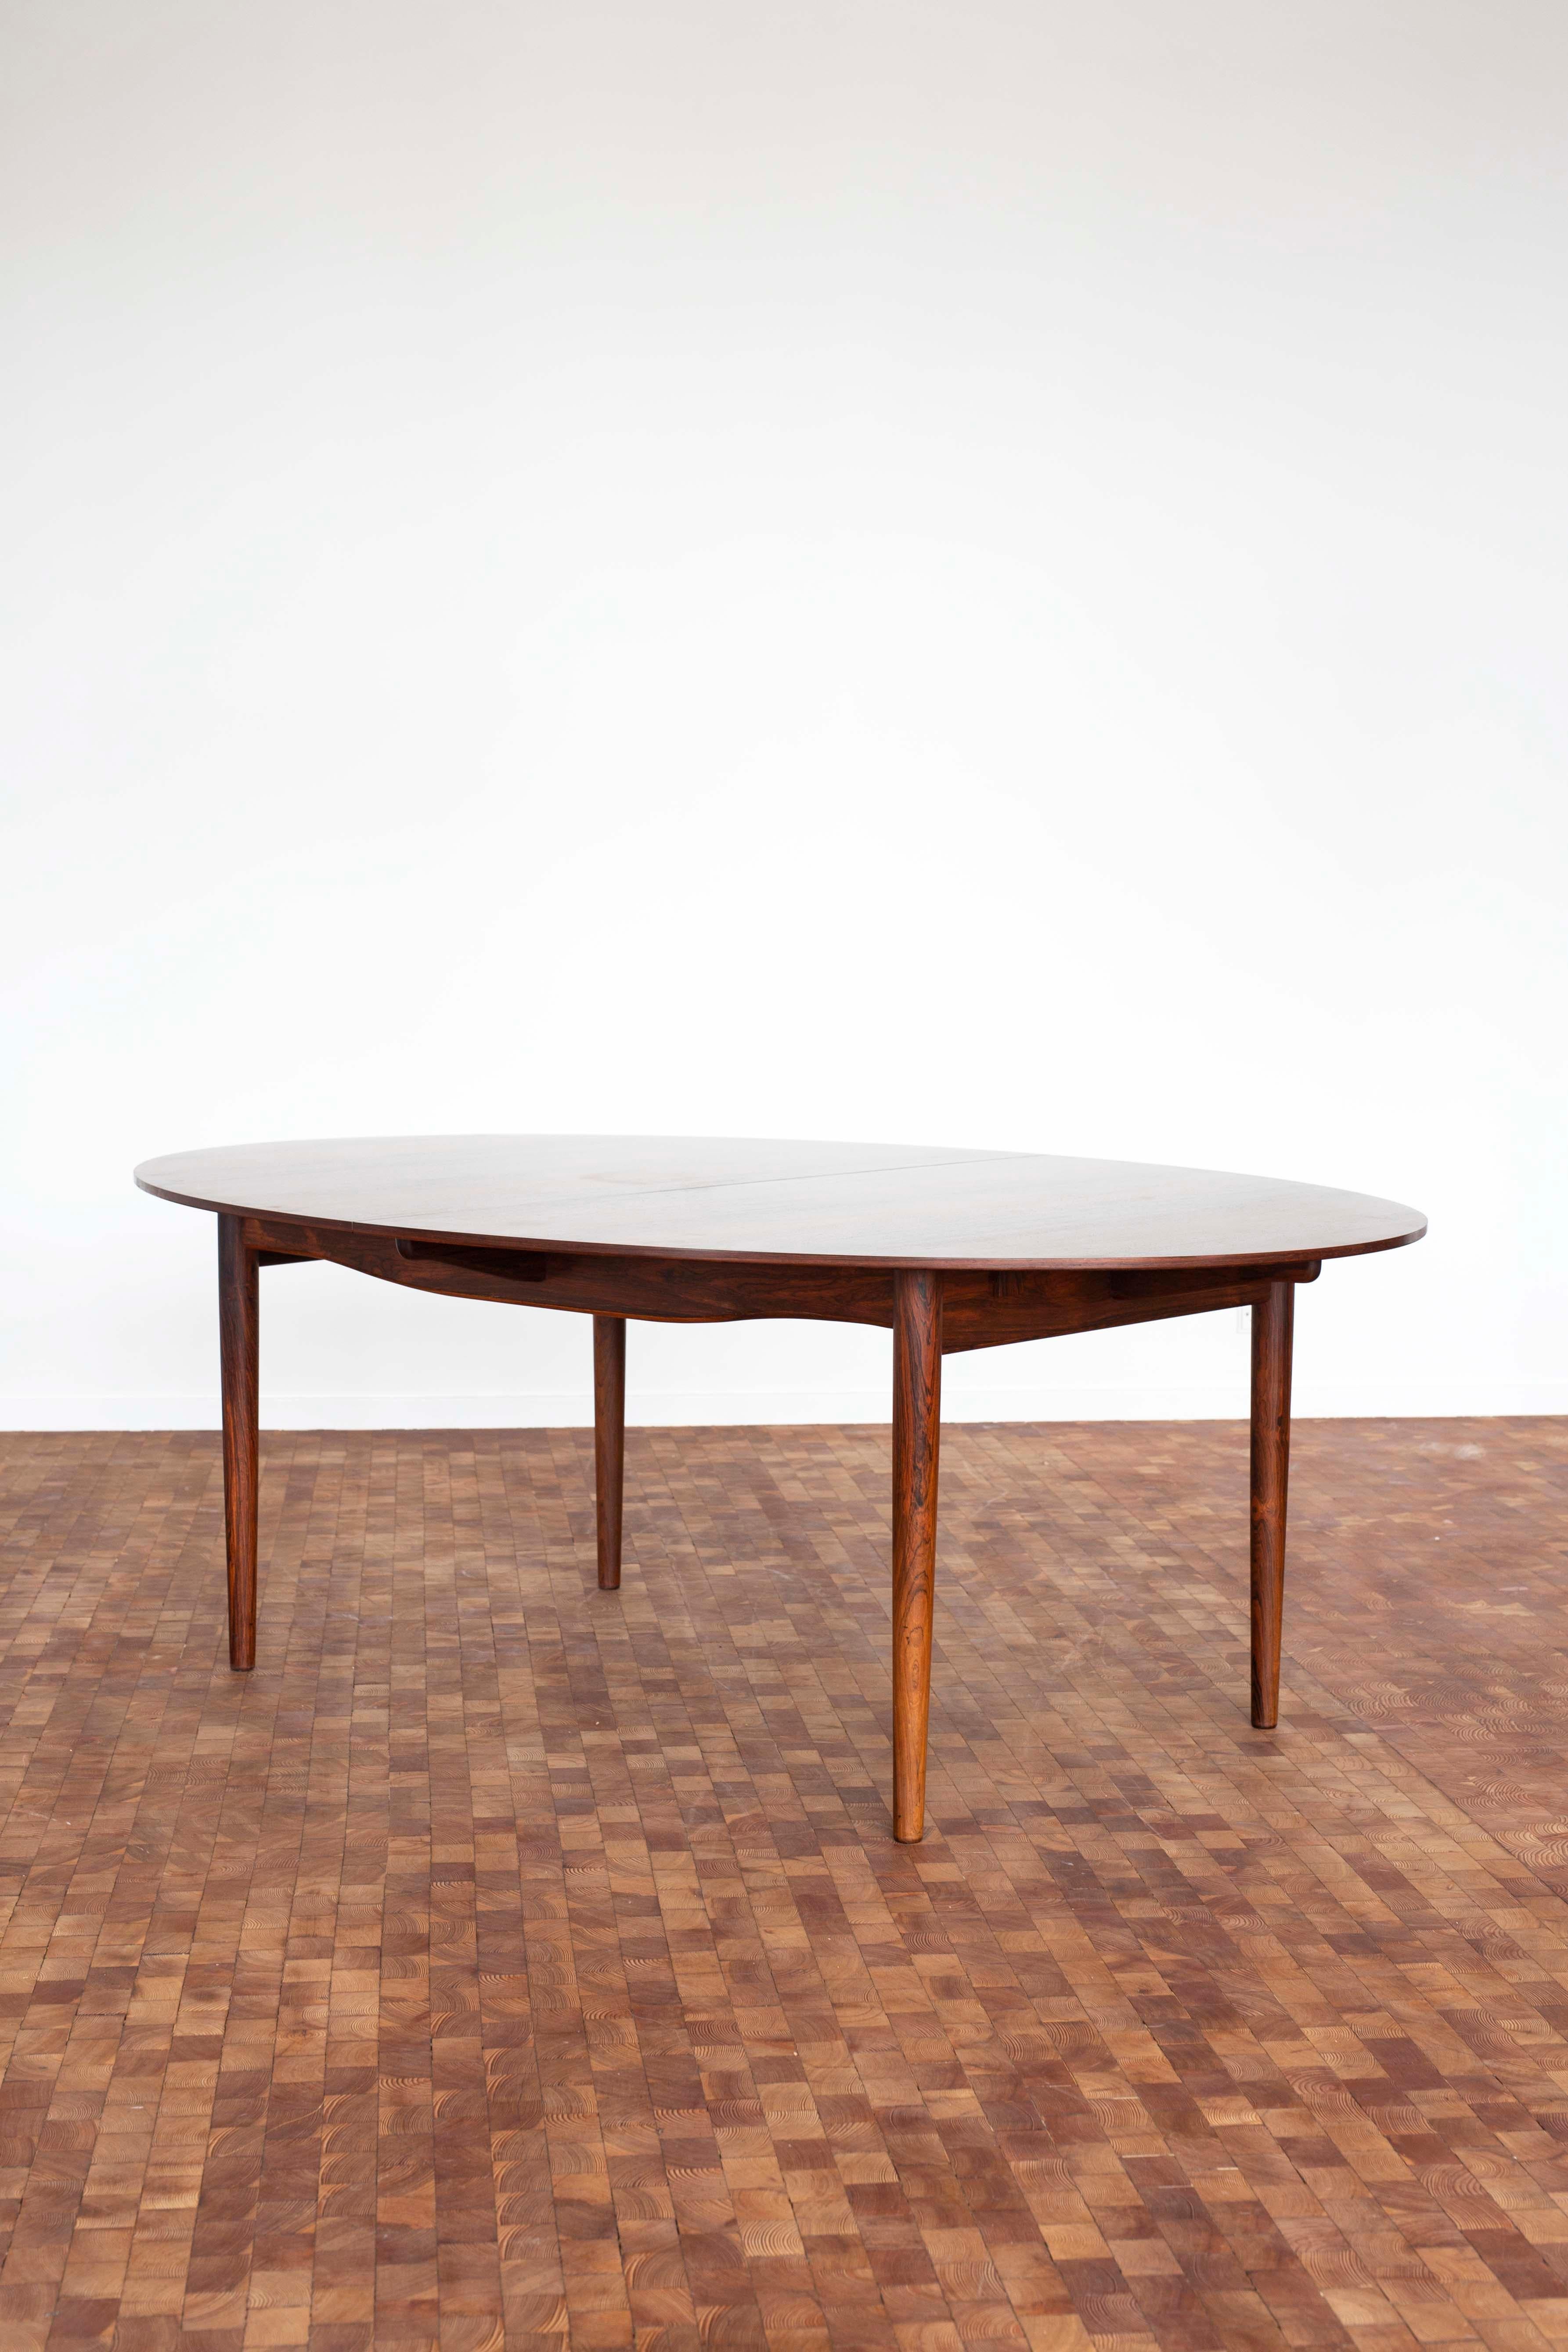 Rare Finn Juhl 'Judas' table in Brazilian rosewood. Including two extension leaves in very fine original condition. This is the version without silver coin inlays. 

Only one owner since purchased in Copenhagen, 1952. 

Designed 1948 and